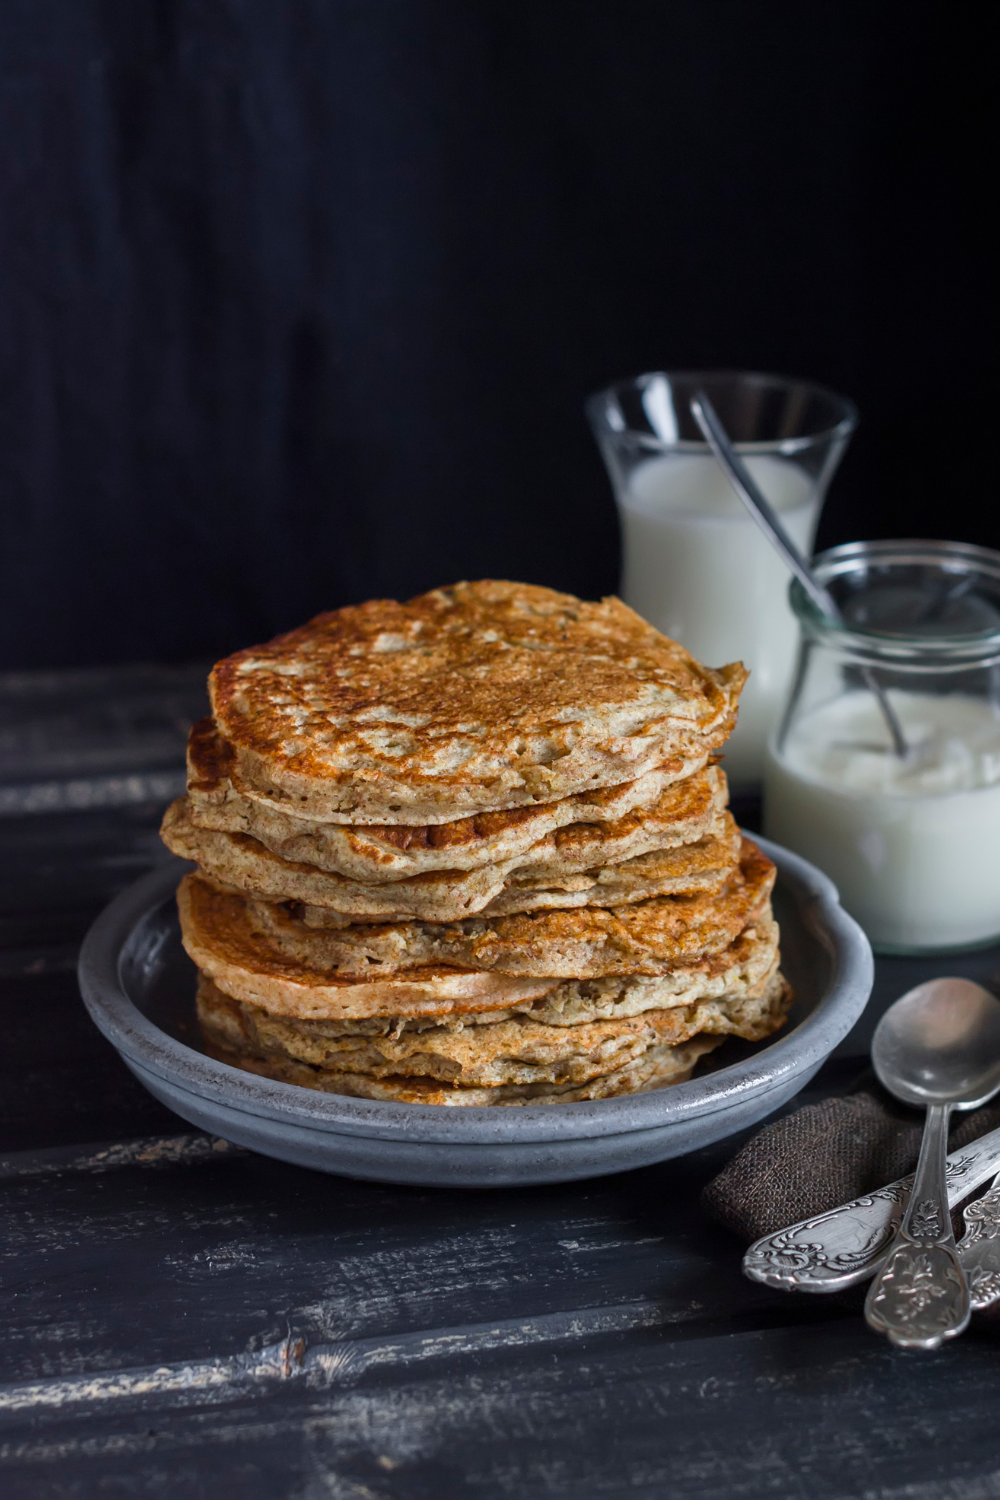 Ideas for high-fiber breakfasts: whole wheat pancakes